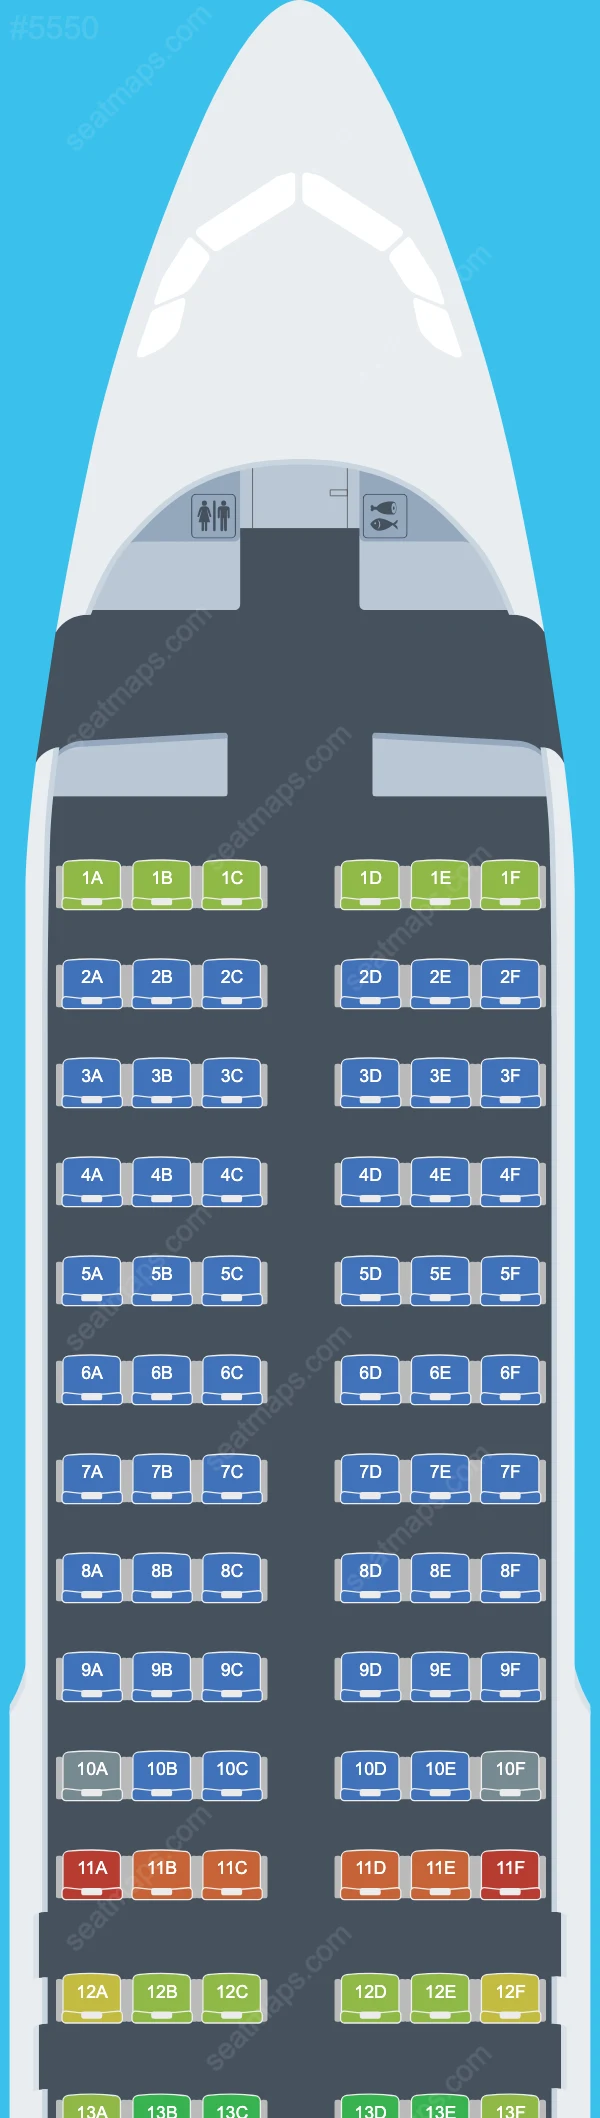 Go First Airbus A320 Seat Maps A320-200neo